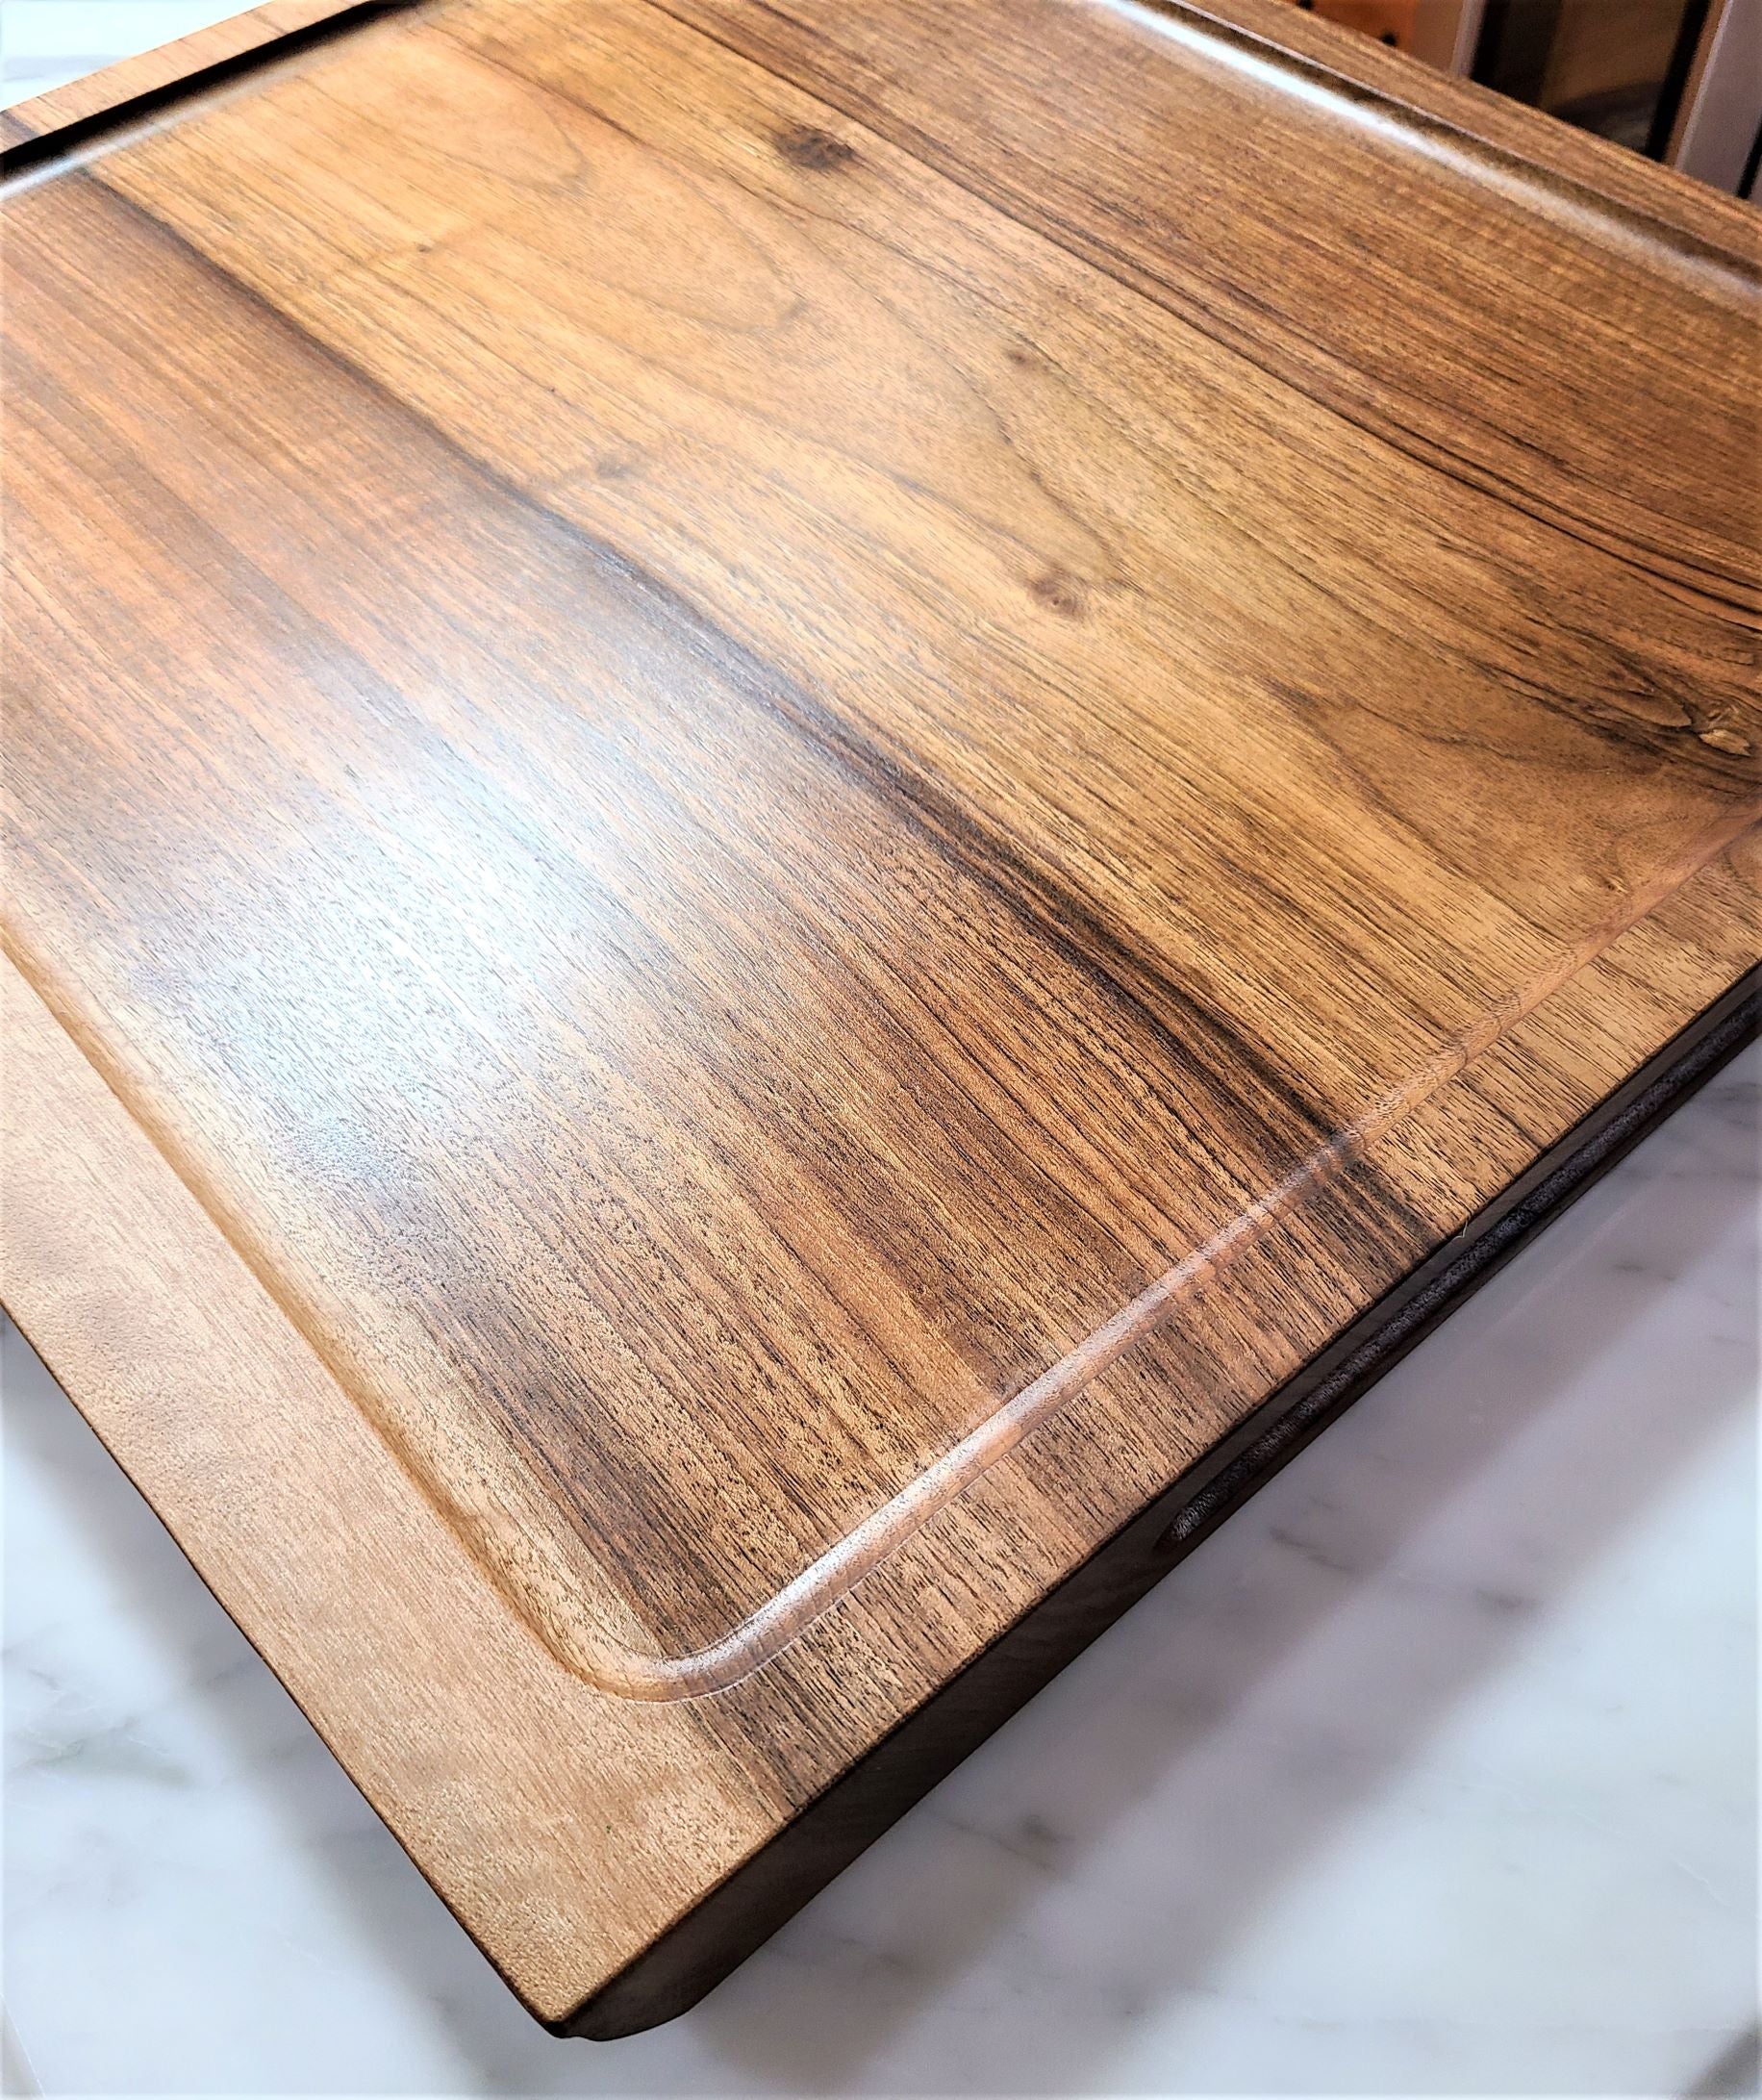 Top view of a custom carving board made of walnut that shows a deep well instead of the standard drip edge.  Made in USA by ZimBoards